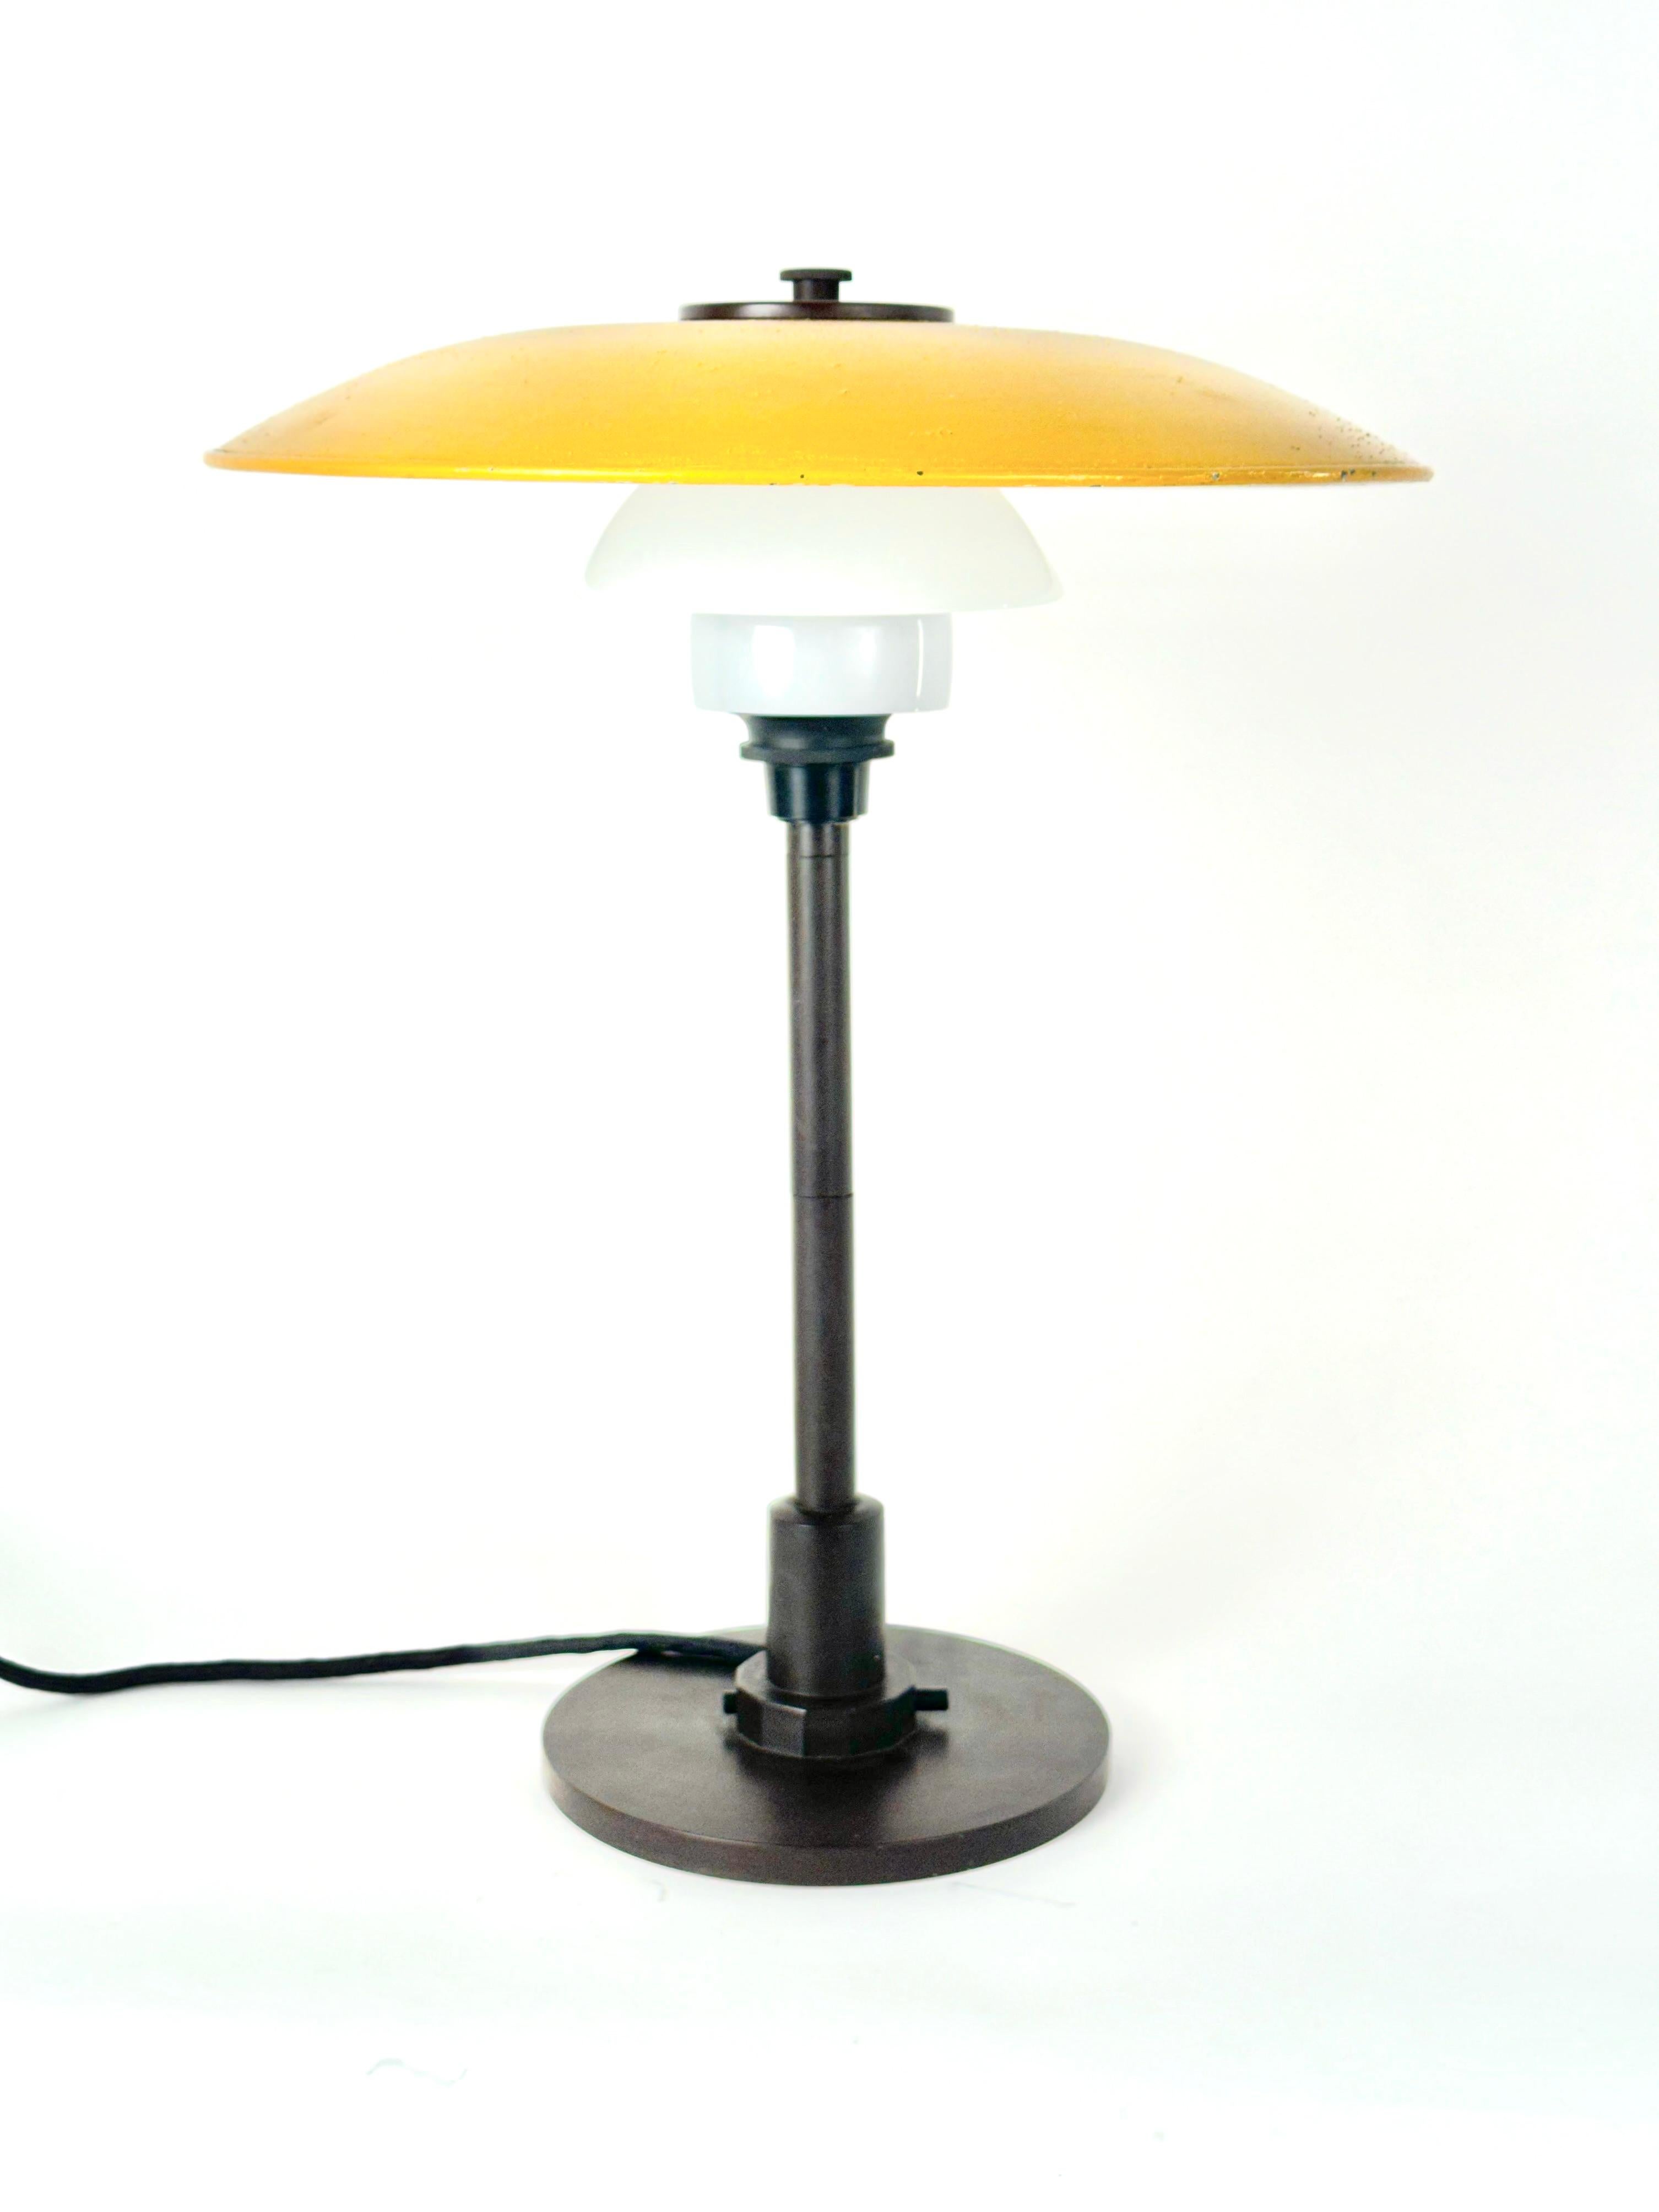 A vintage table lamp designed by Poul Henningsen and edited by Louis Poulsen on the 70s. Model 3 1/2/2 1/2 Isolation lamp. Bakelite table lamp, with yellow lacquered zinc top shade and multilayer opal glass middle and lower shade.
Literature: